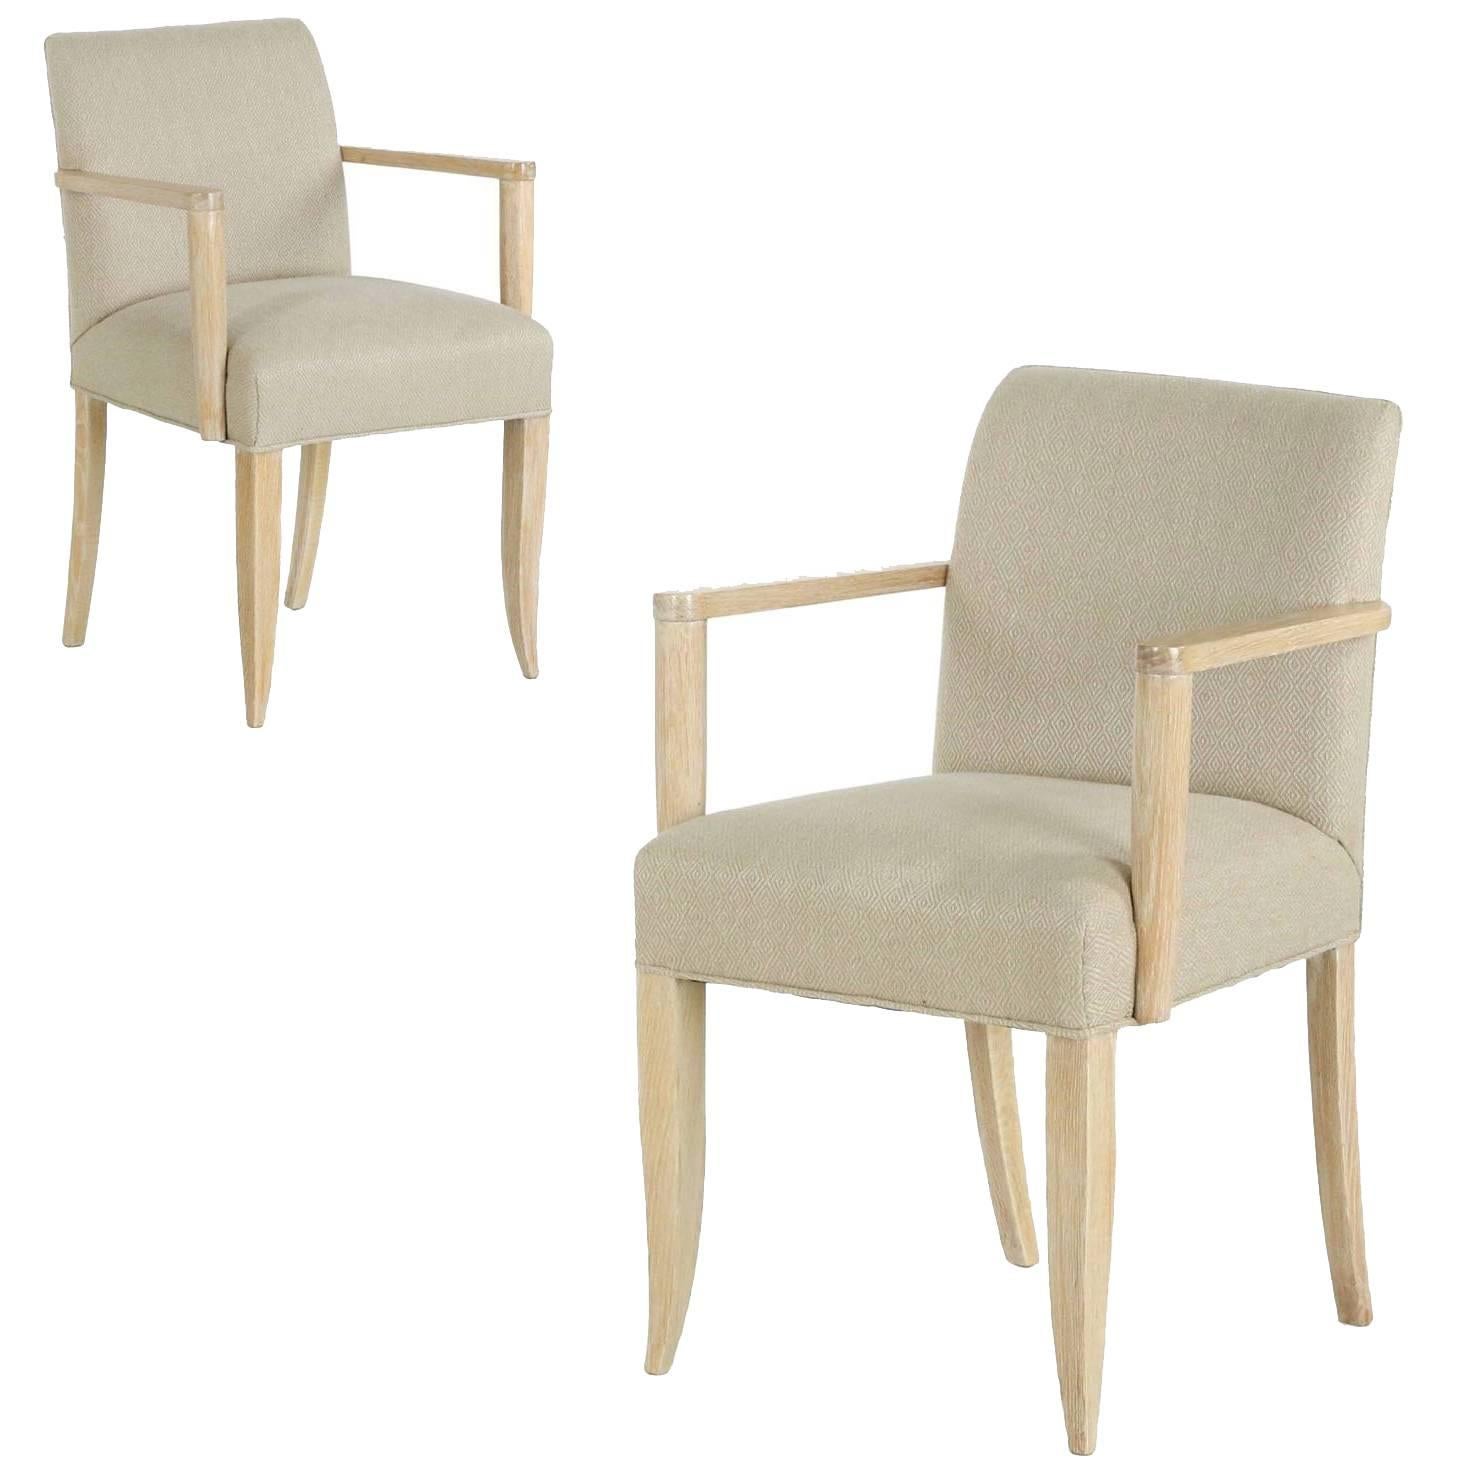 Pair of French Modern Cerused Oak Armchairs, 20th Century